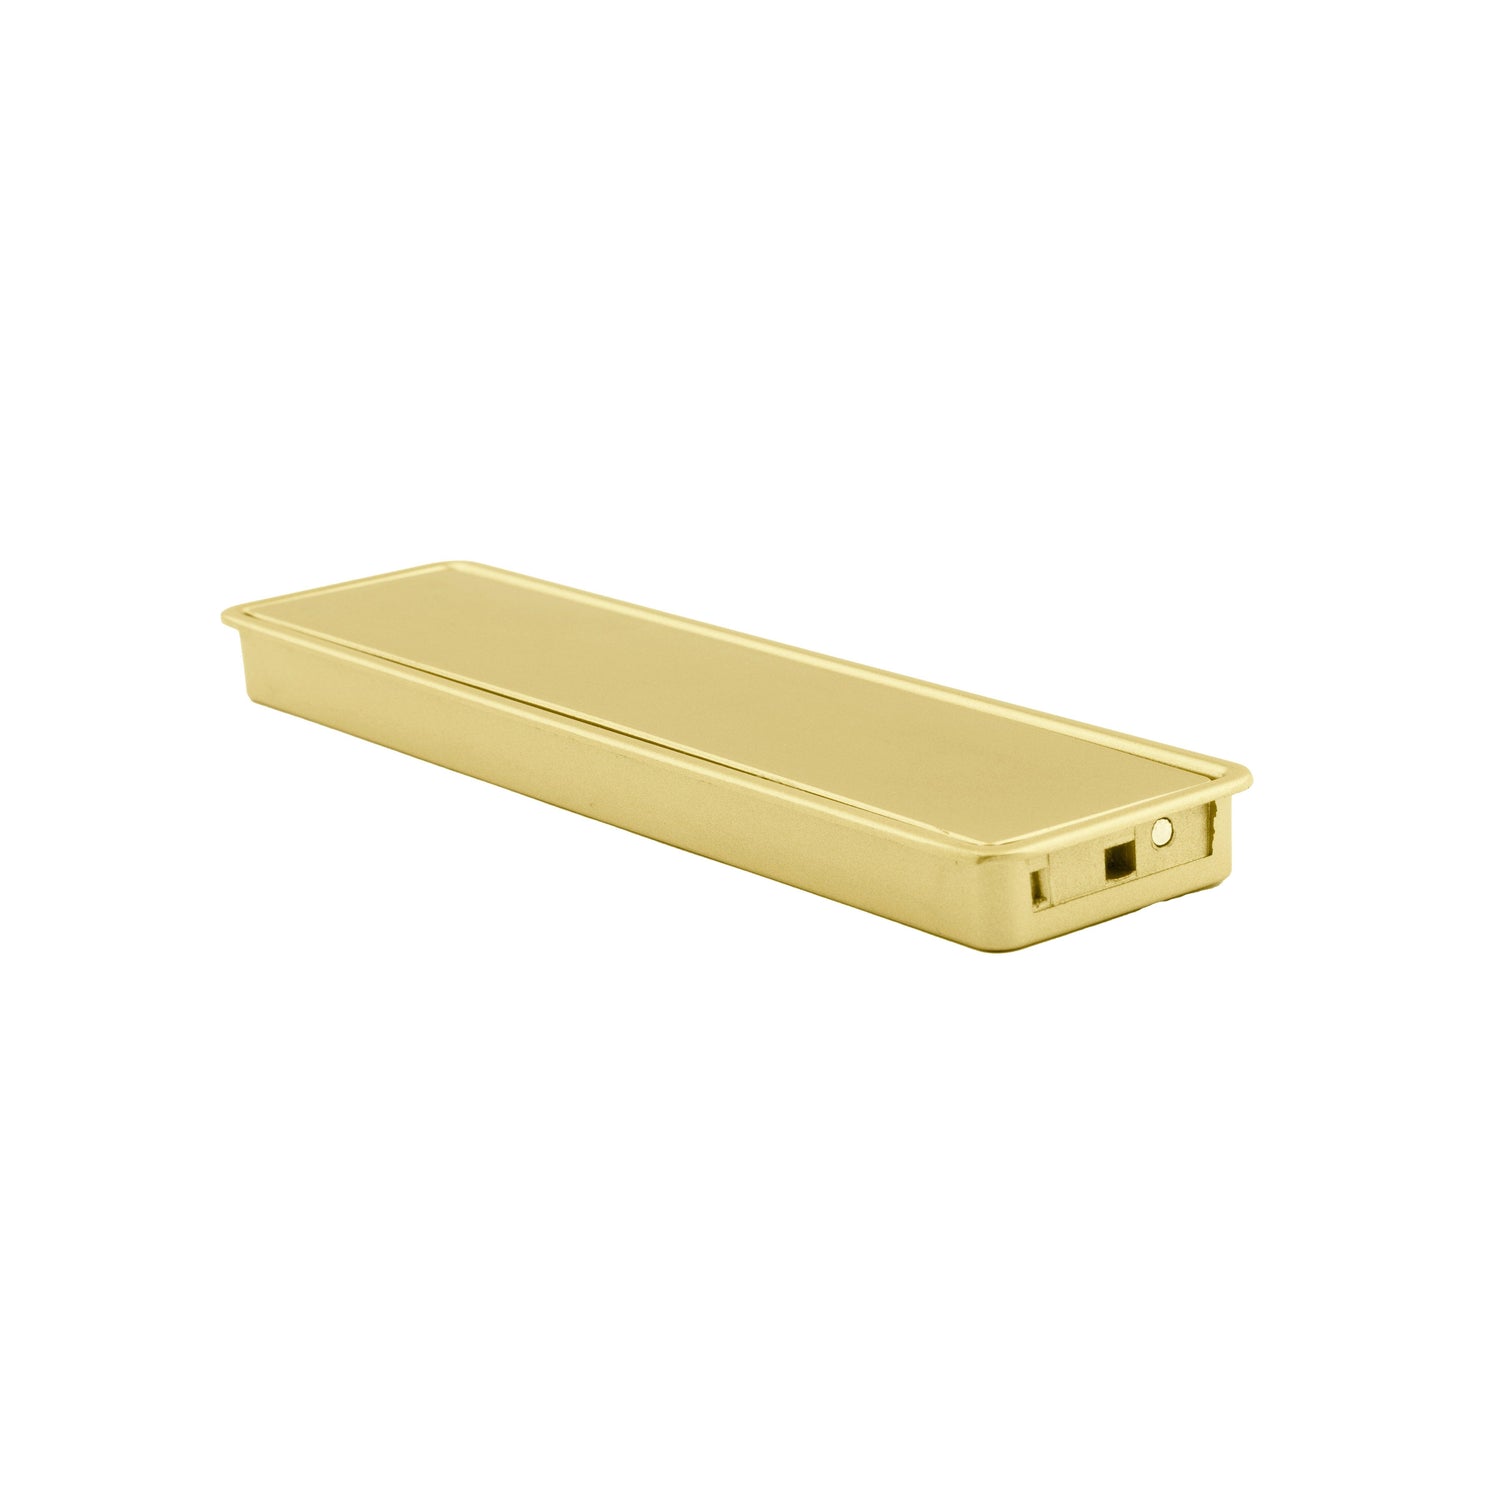 Concealed Square Handle Knob 181mm / Gold - M A N T A R A